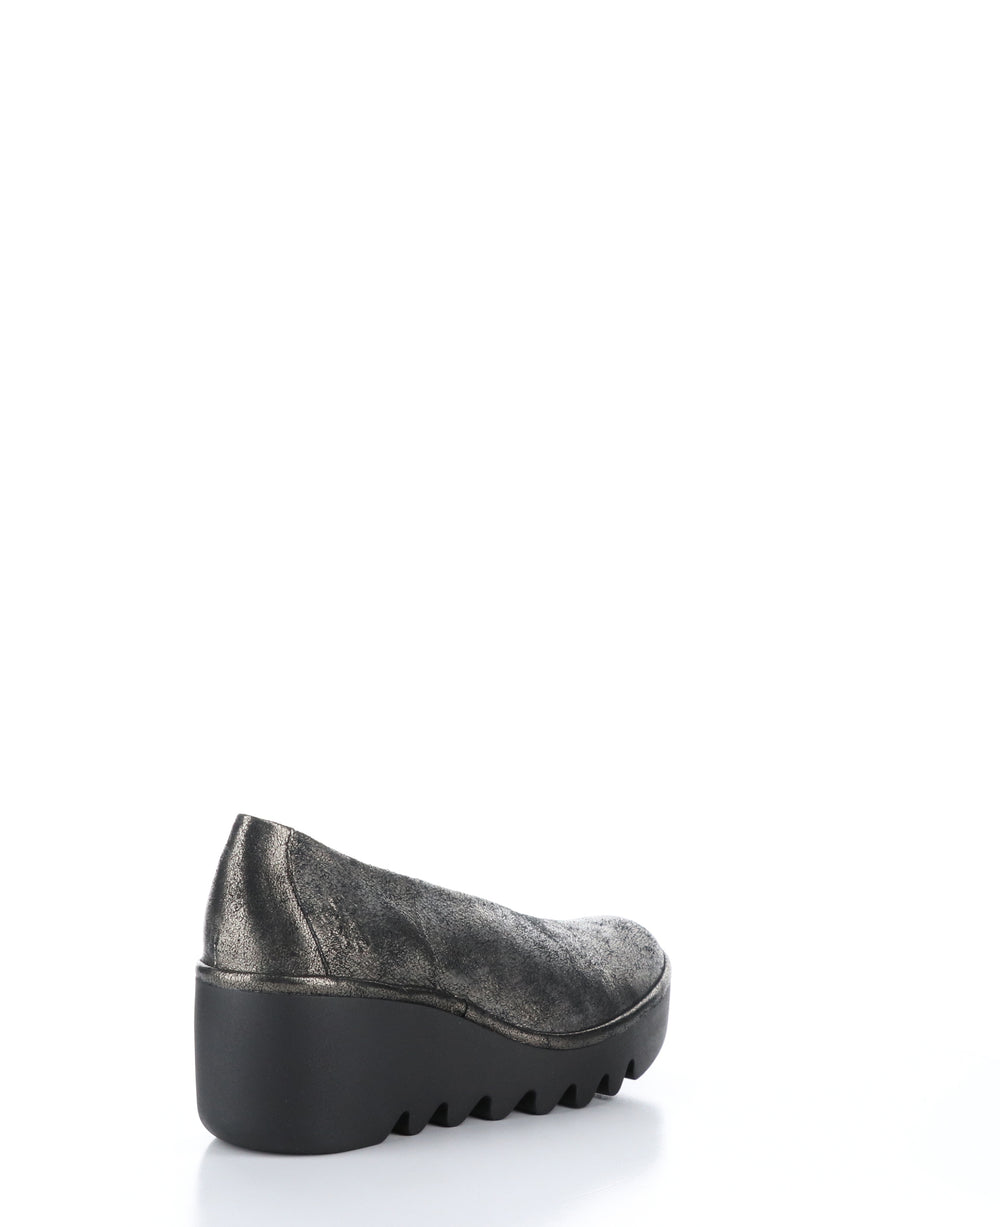 BESO246FLY Graphite Round Toe Shoes